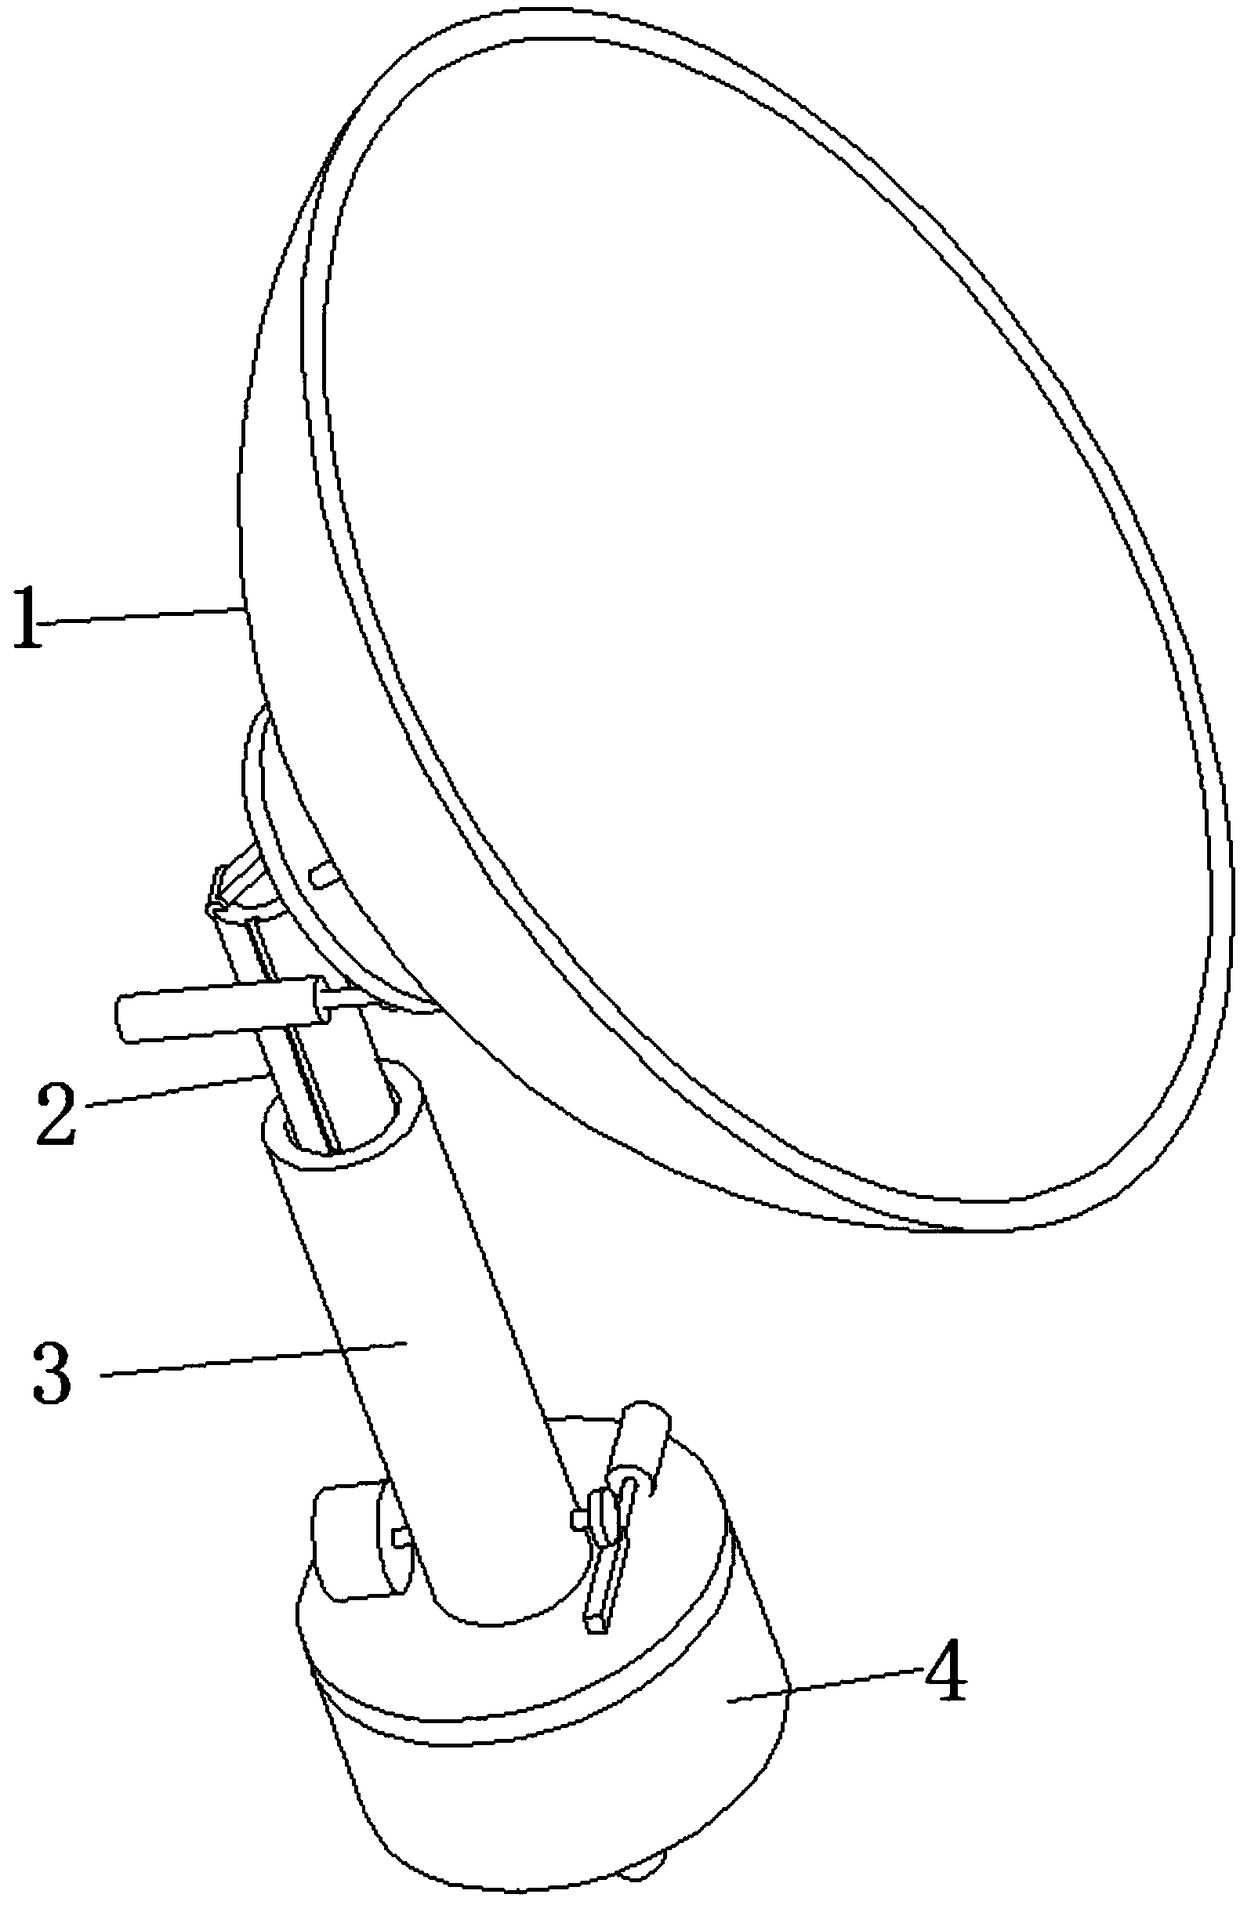 A household satellite communication antenna which is convenient to be adjusted